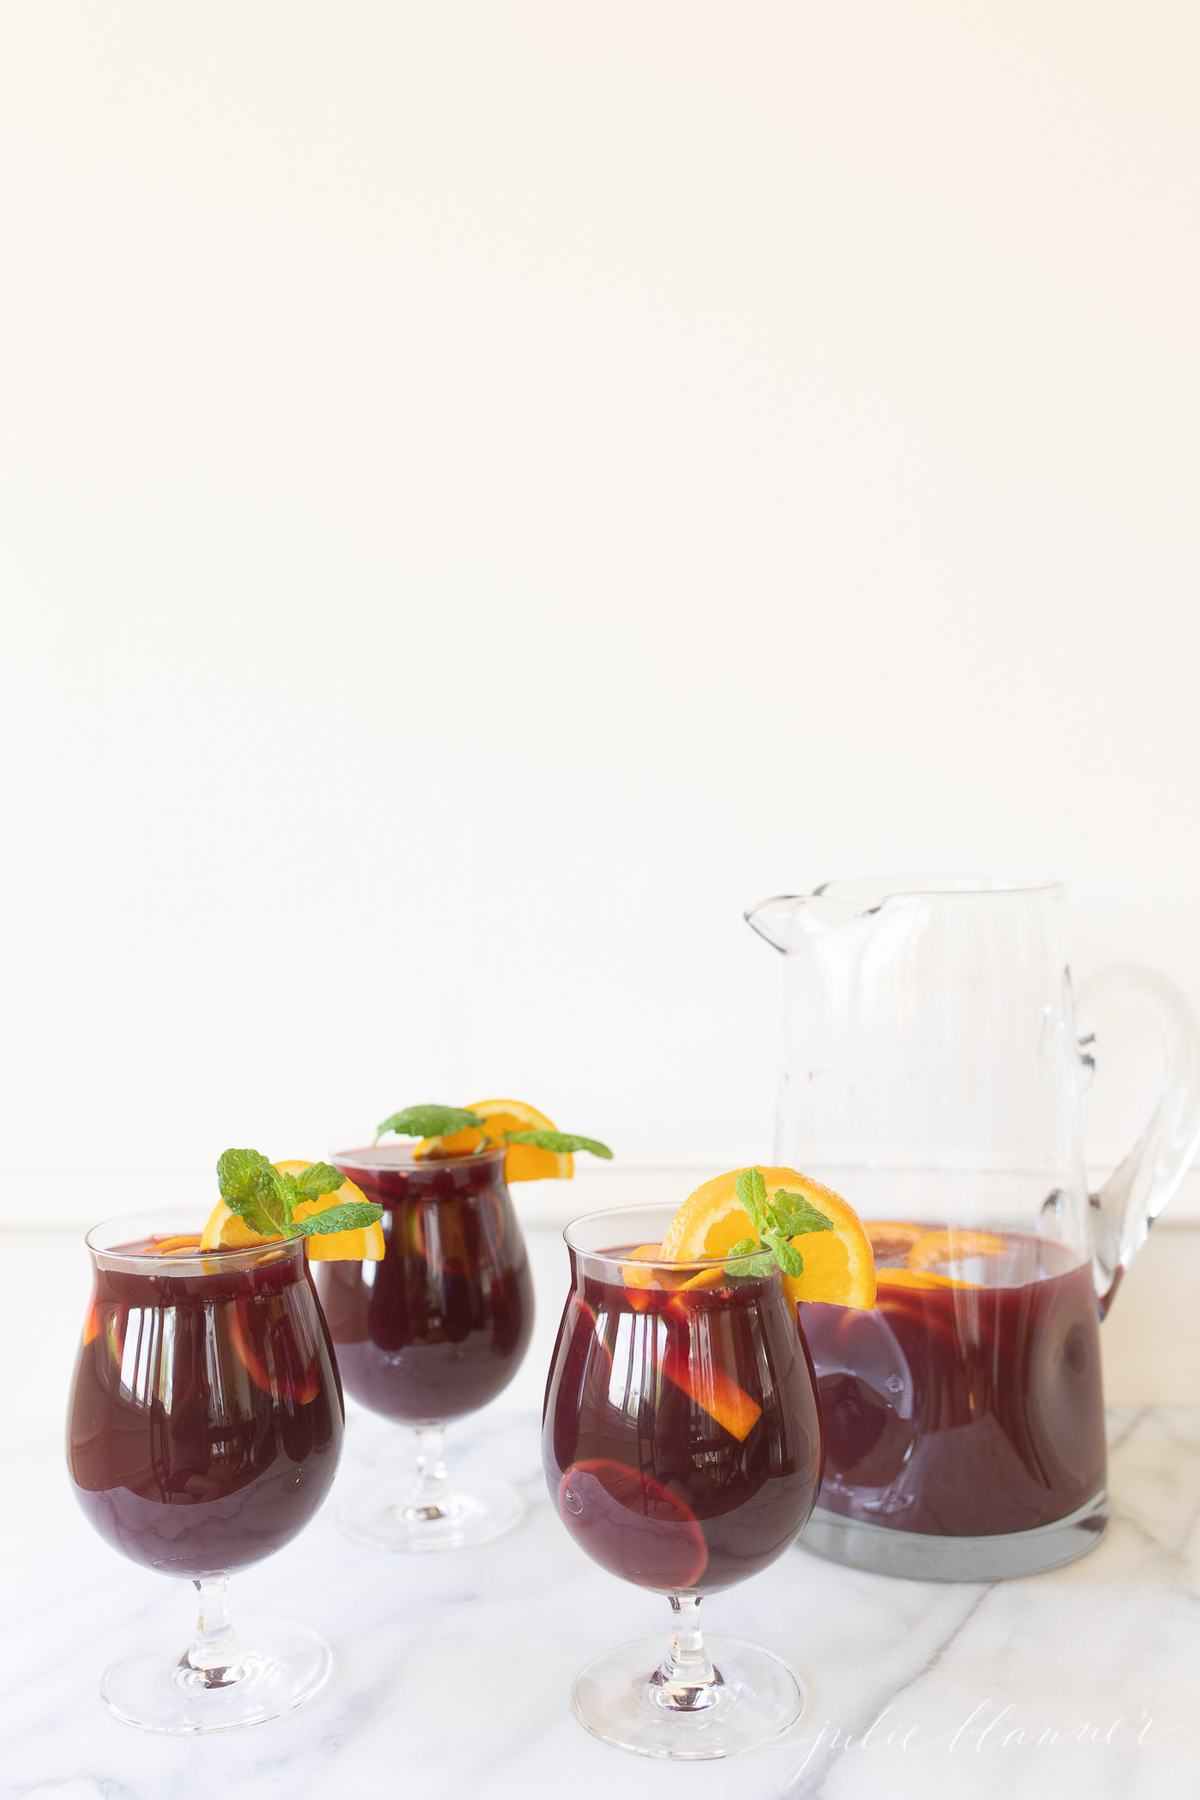 Authentic Spanish Sangria Recipe with dry Spanish red wine, filled with lemons, limes, oranges and more. This Sangria Punch is perfect for summertime parties and serves beautifully in a glass pitcher.